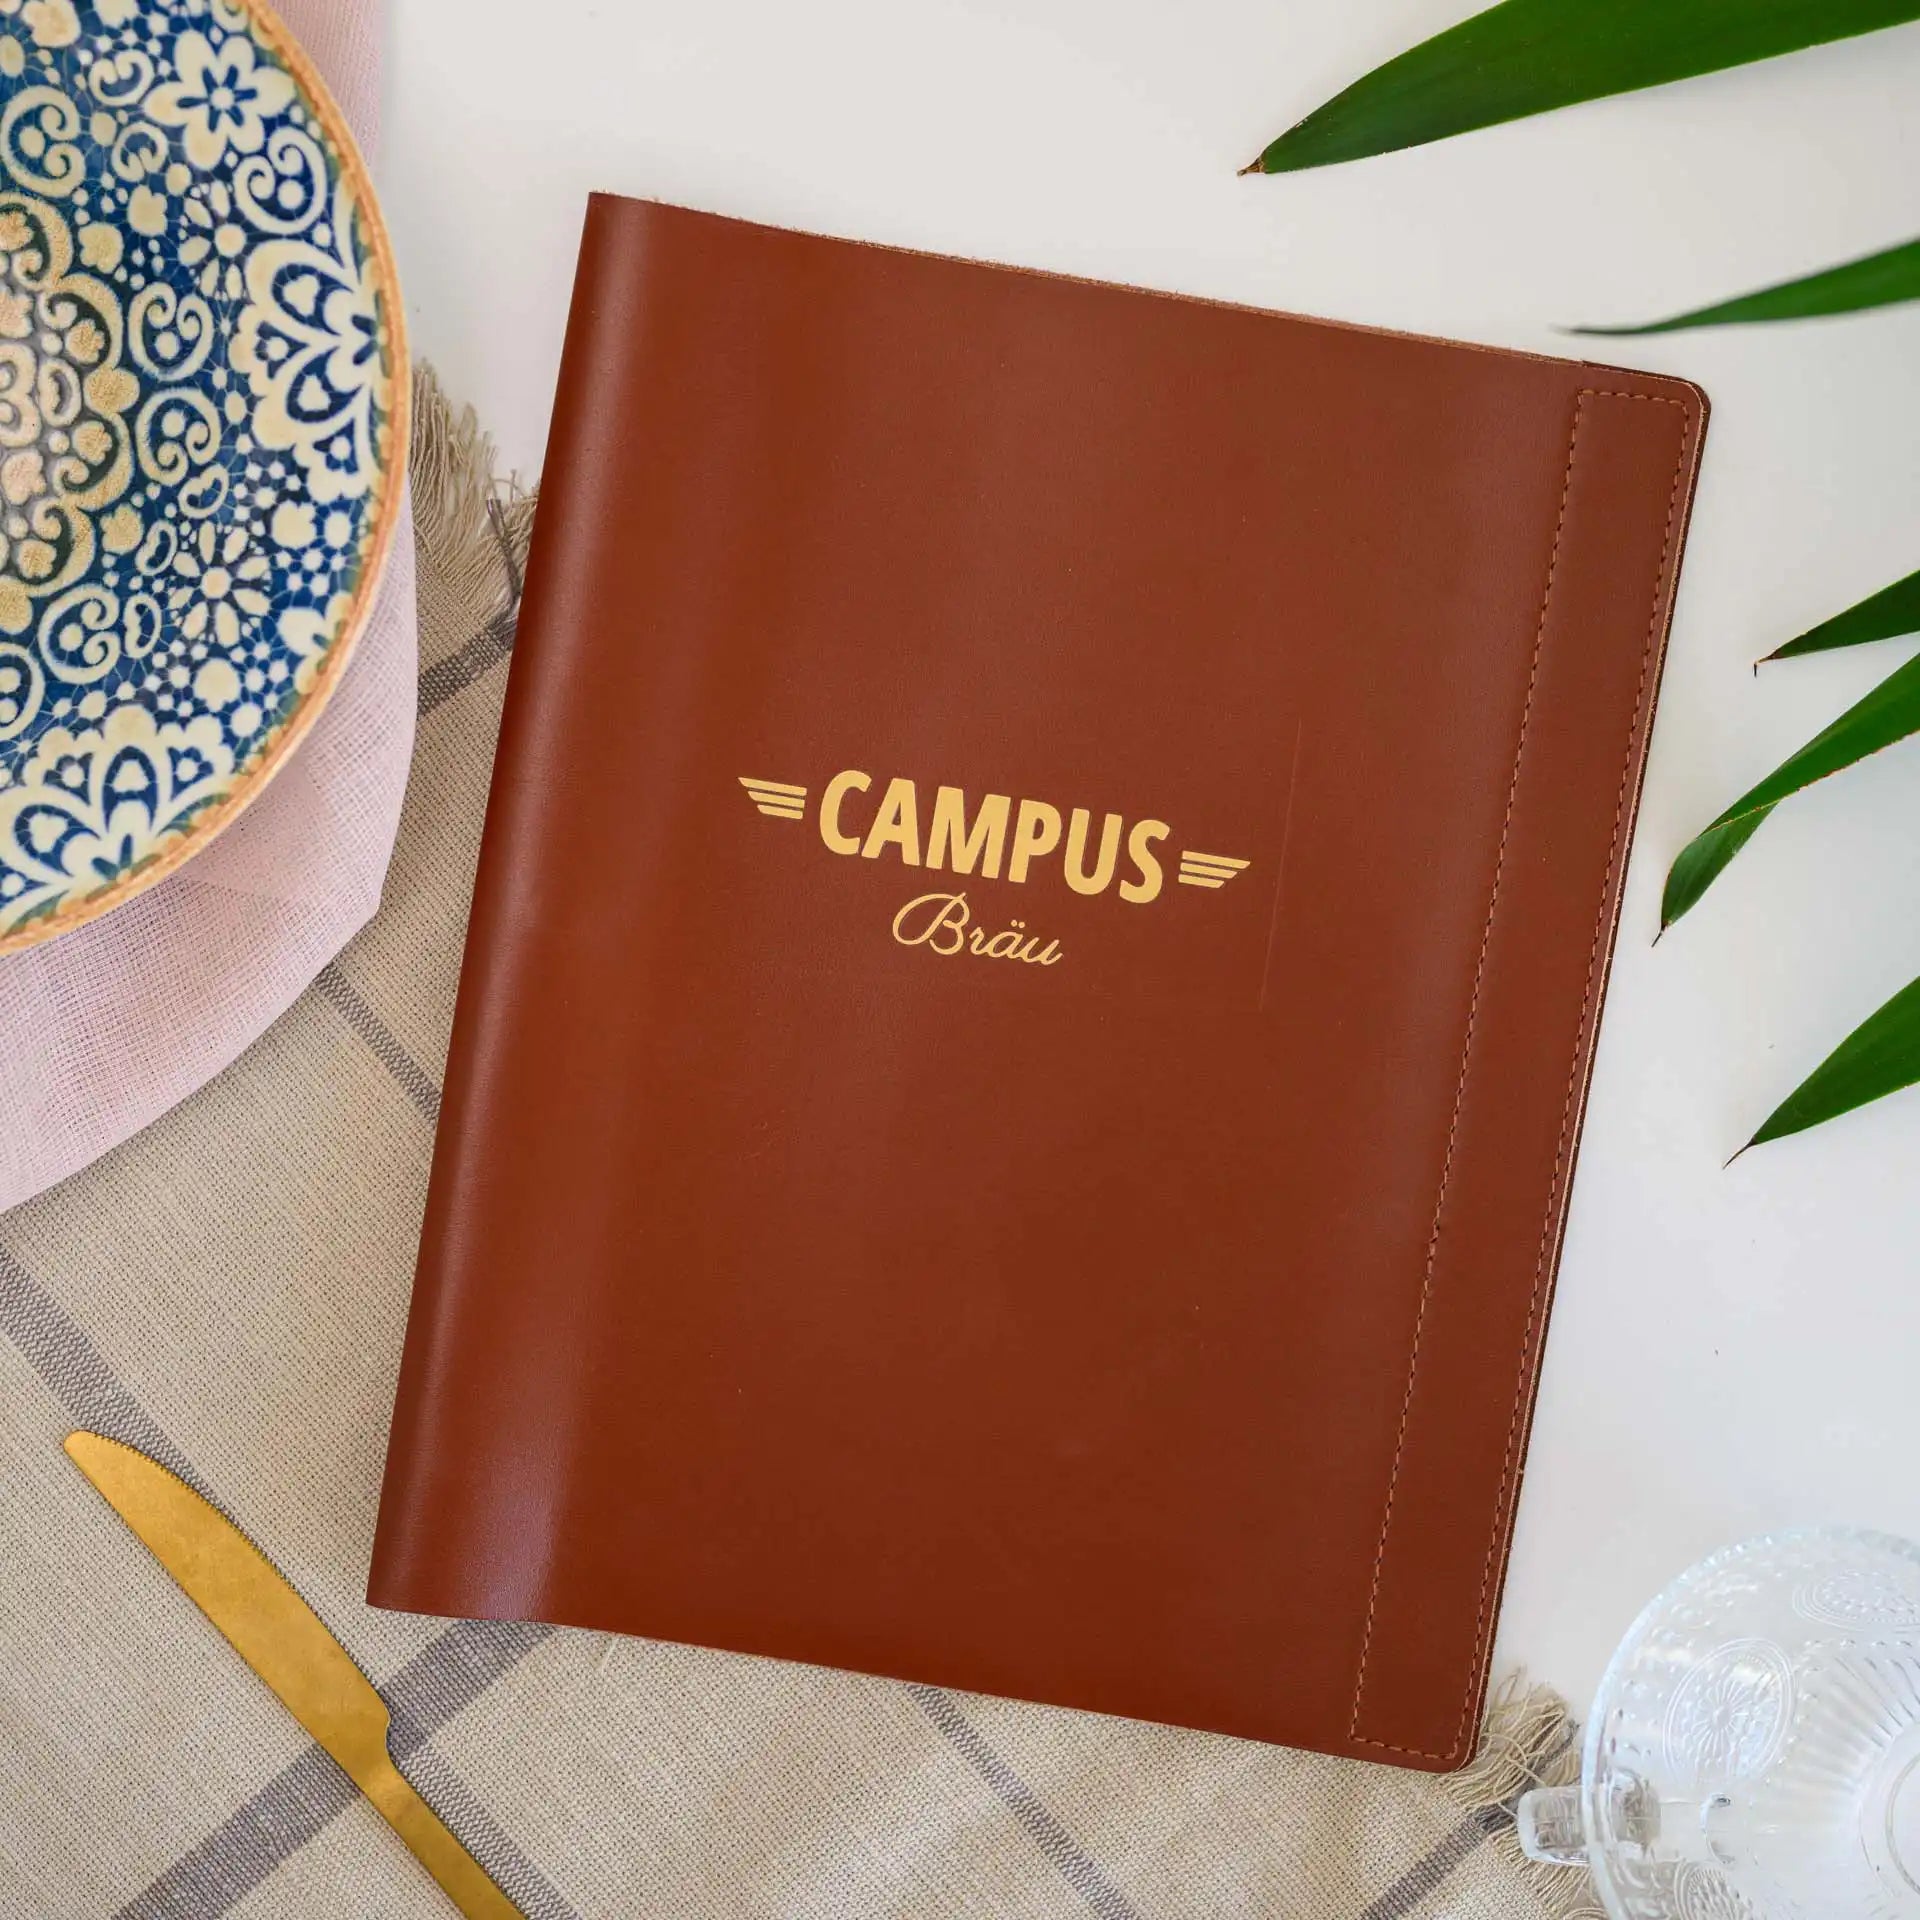 Classic Leather Menu Cover, adding elegance to your restaurant's presentation.